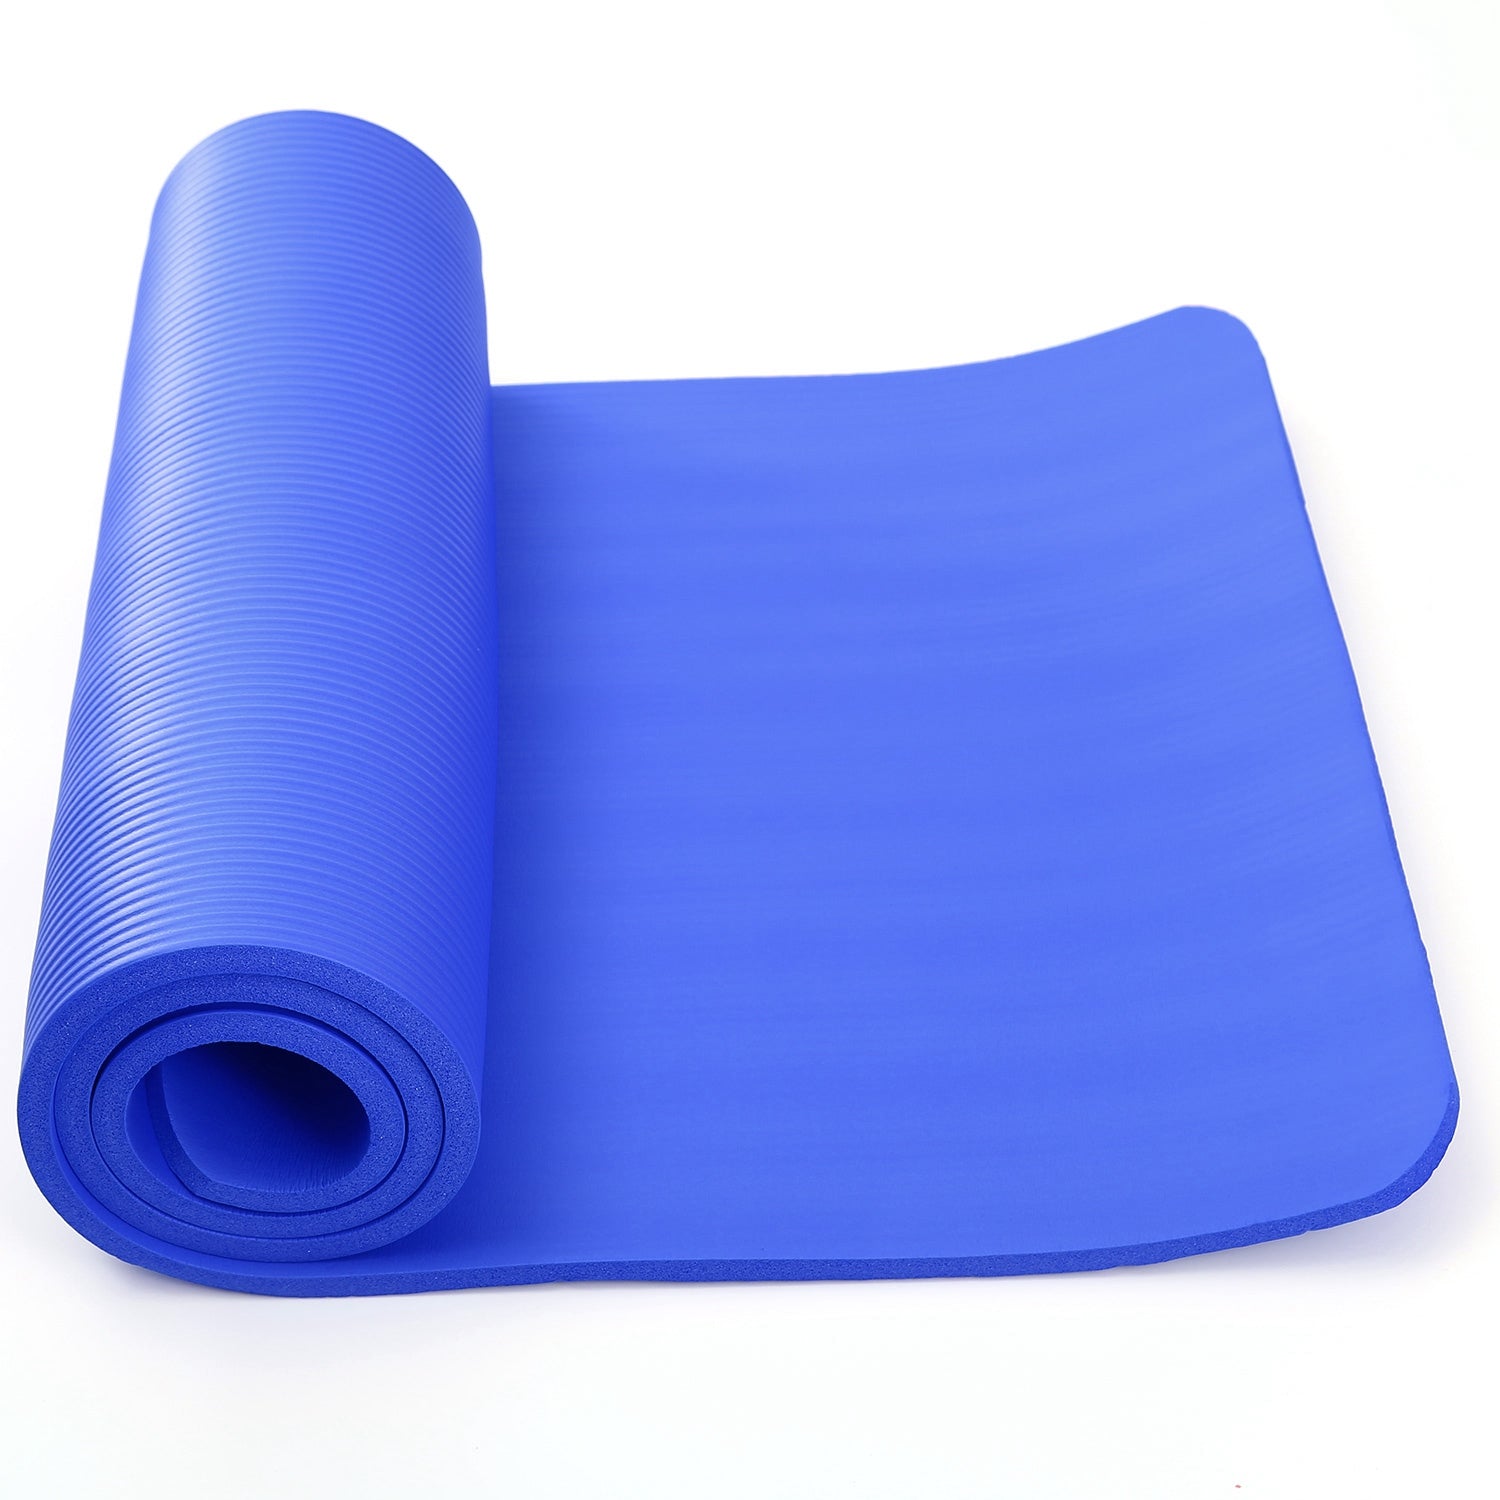 title:0.6-inch Thick Yoga Mat Anti-Tear High Density NBR Exercise Mat Anti-Slip Fitness Mat for Pilates Workout Cushion w/Carrying Strap Storage Bag;color:Blue